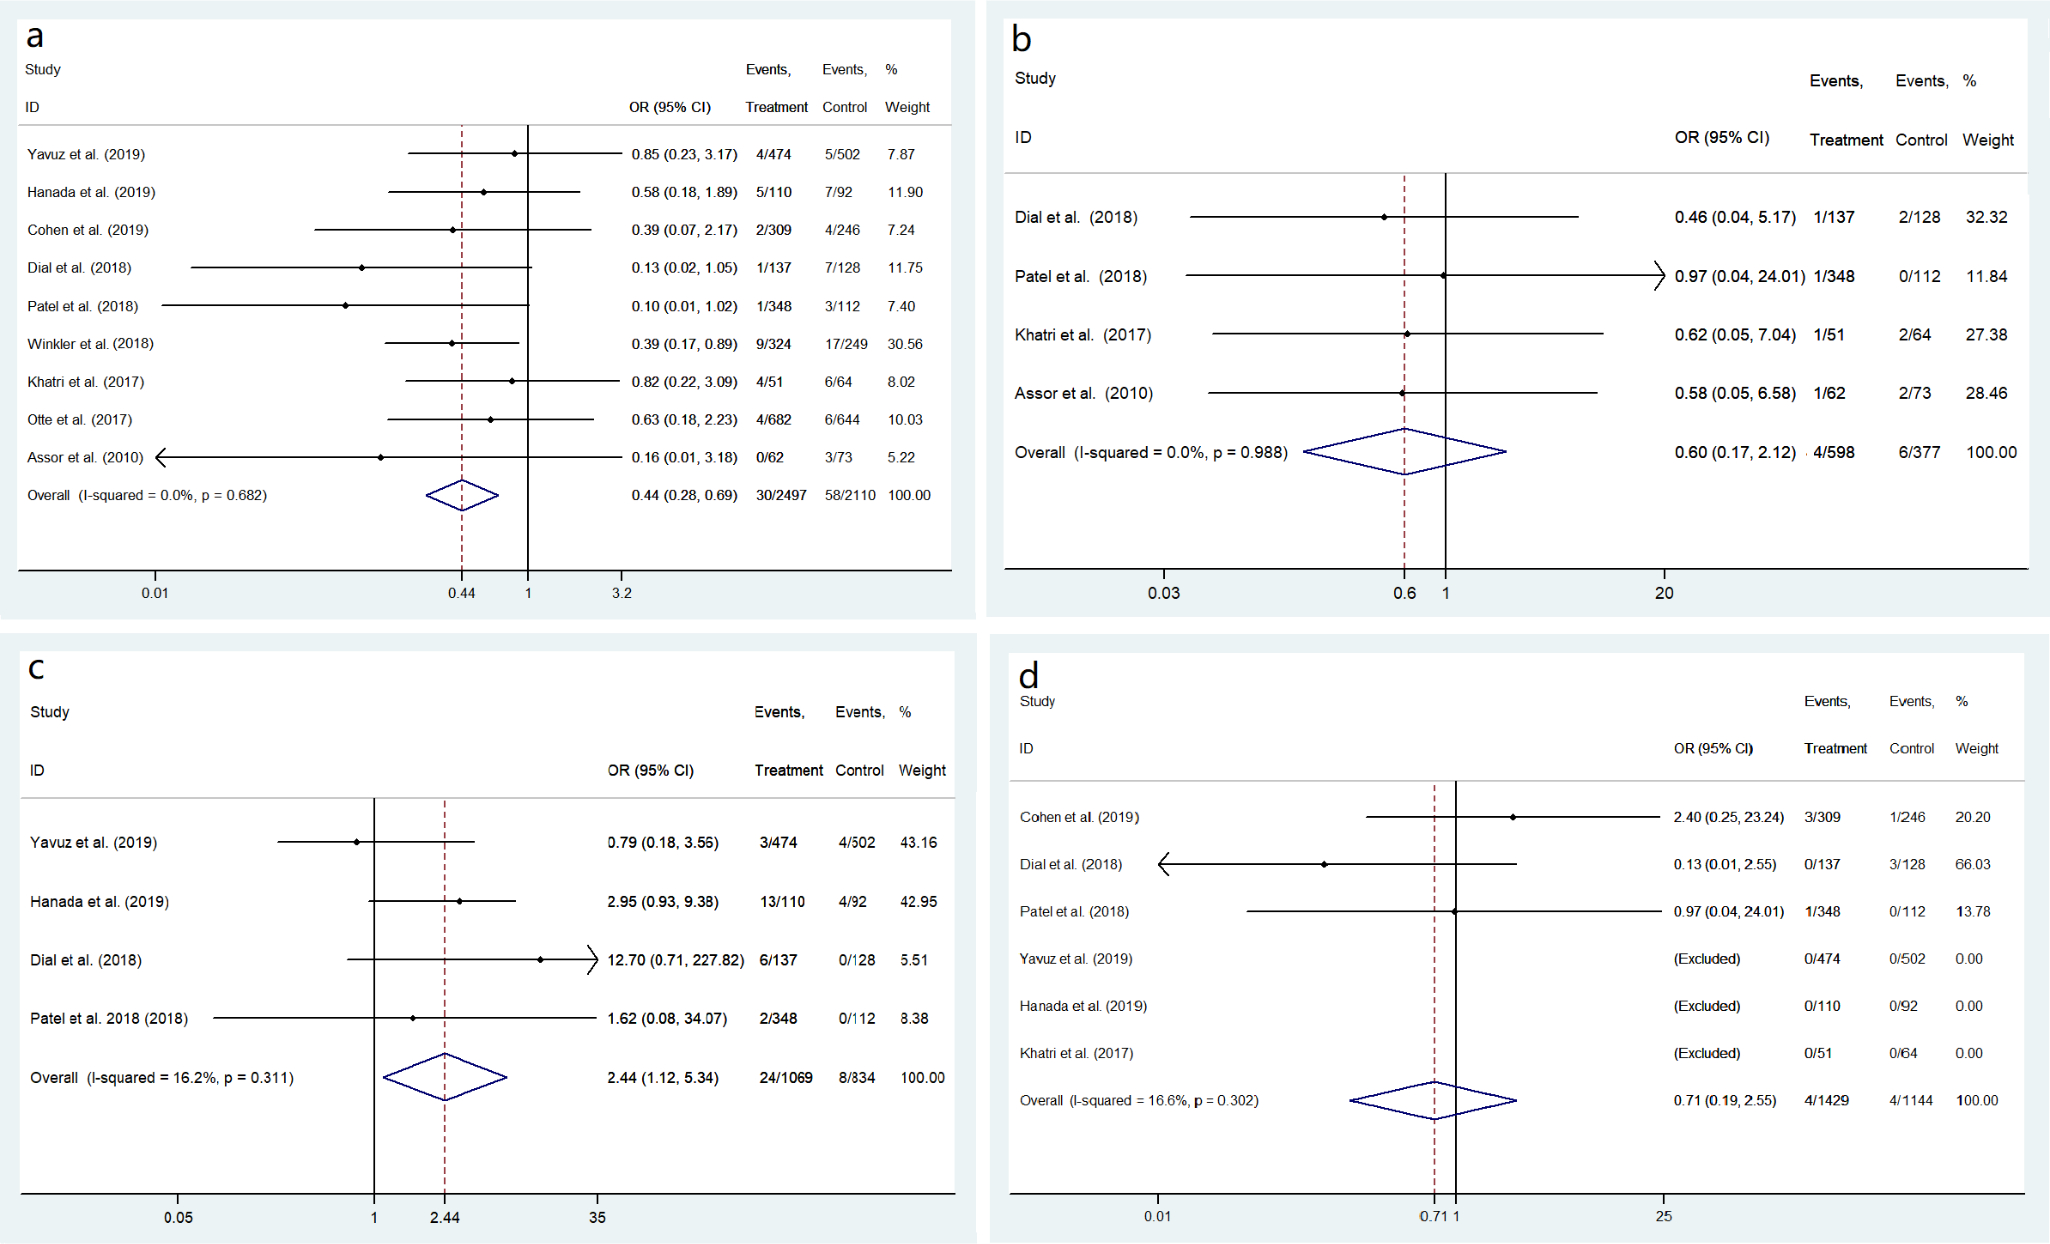 Fig. 3 
            Forest plots of meta-analysis of risk of a) periprosthetic joint infection, b) superficial infection, c) aseptic wound complications, and d) acute kidney injury when intrawound vancomycin was used relative to the risk without it. CI, confidence interval; OR, odds ratio.
          